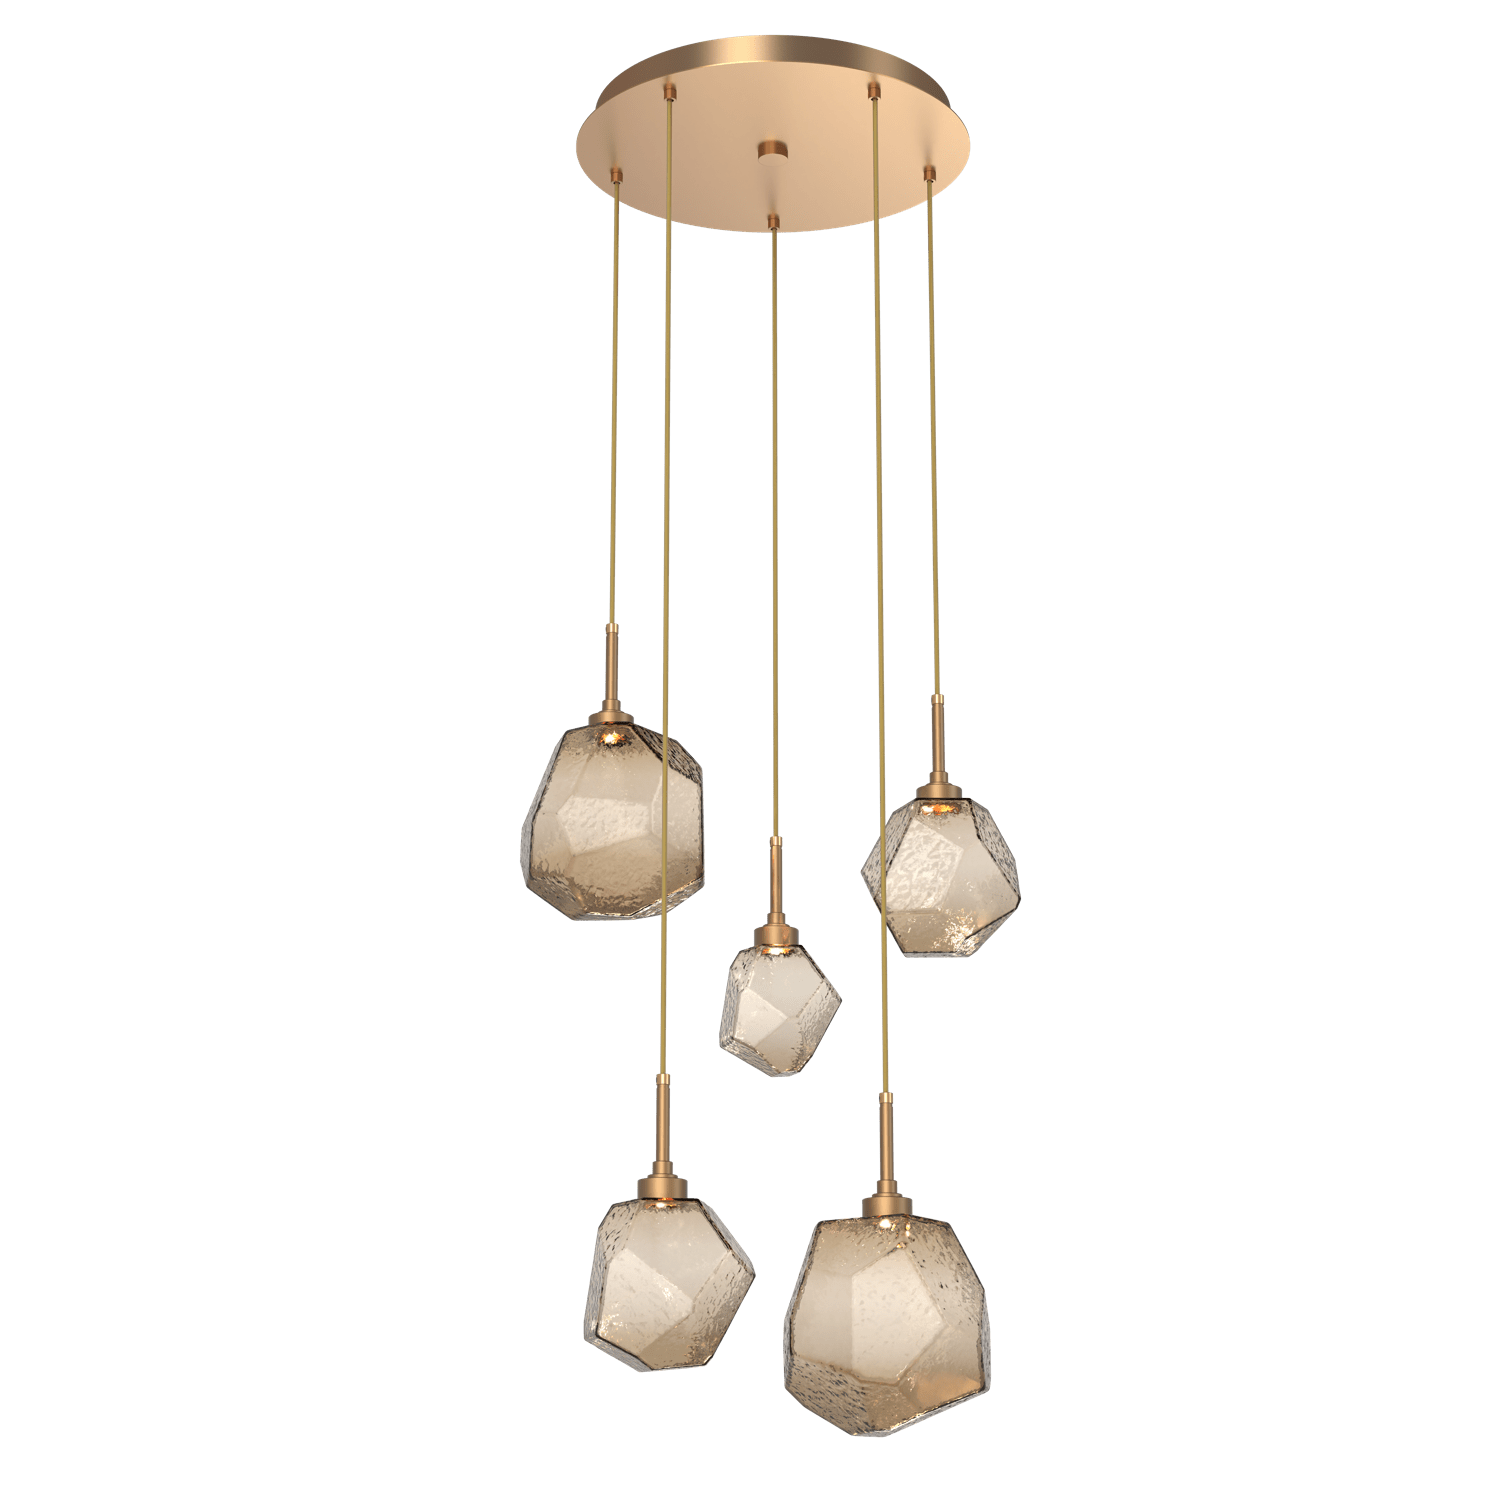 CHB0039-05-NB-B-Hammerton-Studio-Gem-5-light-round-pendant-chandelier-with-novel-brass-finish-and-bronze-blown-glass-shades-and-LED-lamping